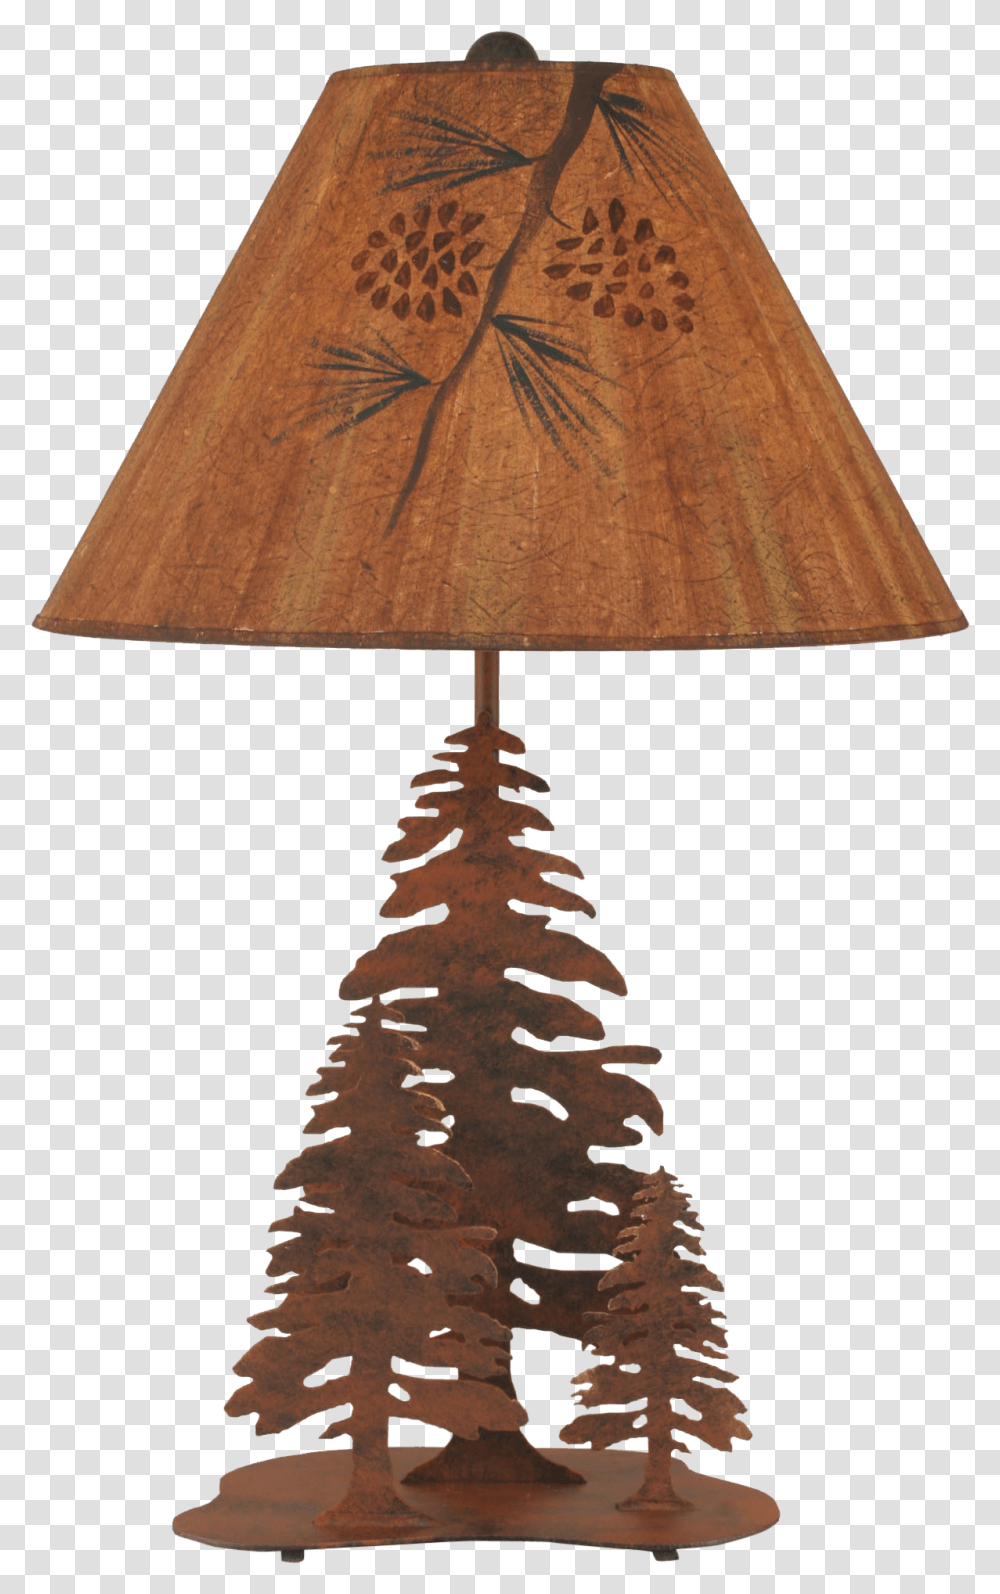 Rust 3 Tree Table Lamp W Pine Branch Shade Electric Light, Lampshade Transparent Png